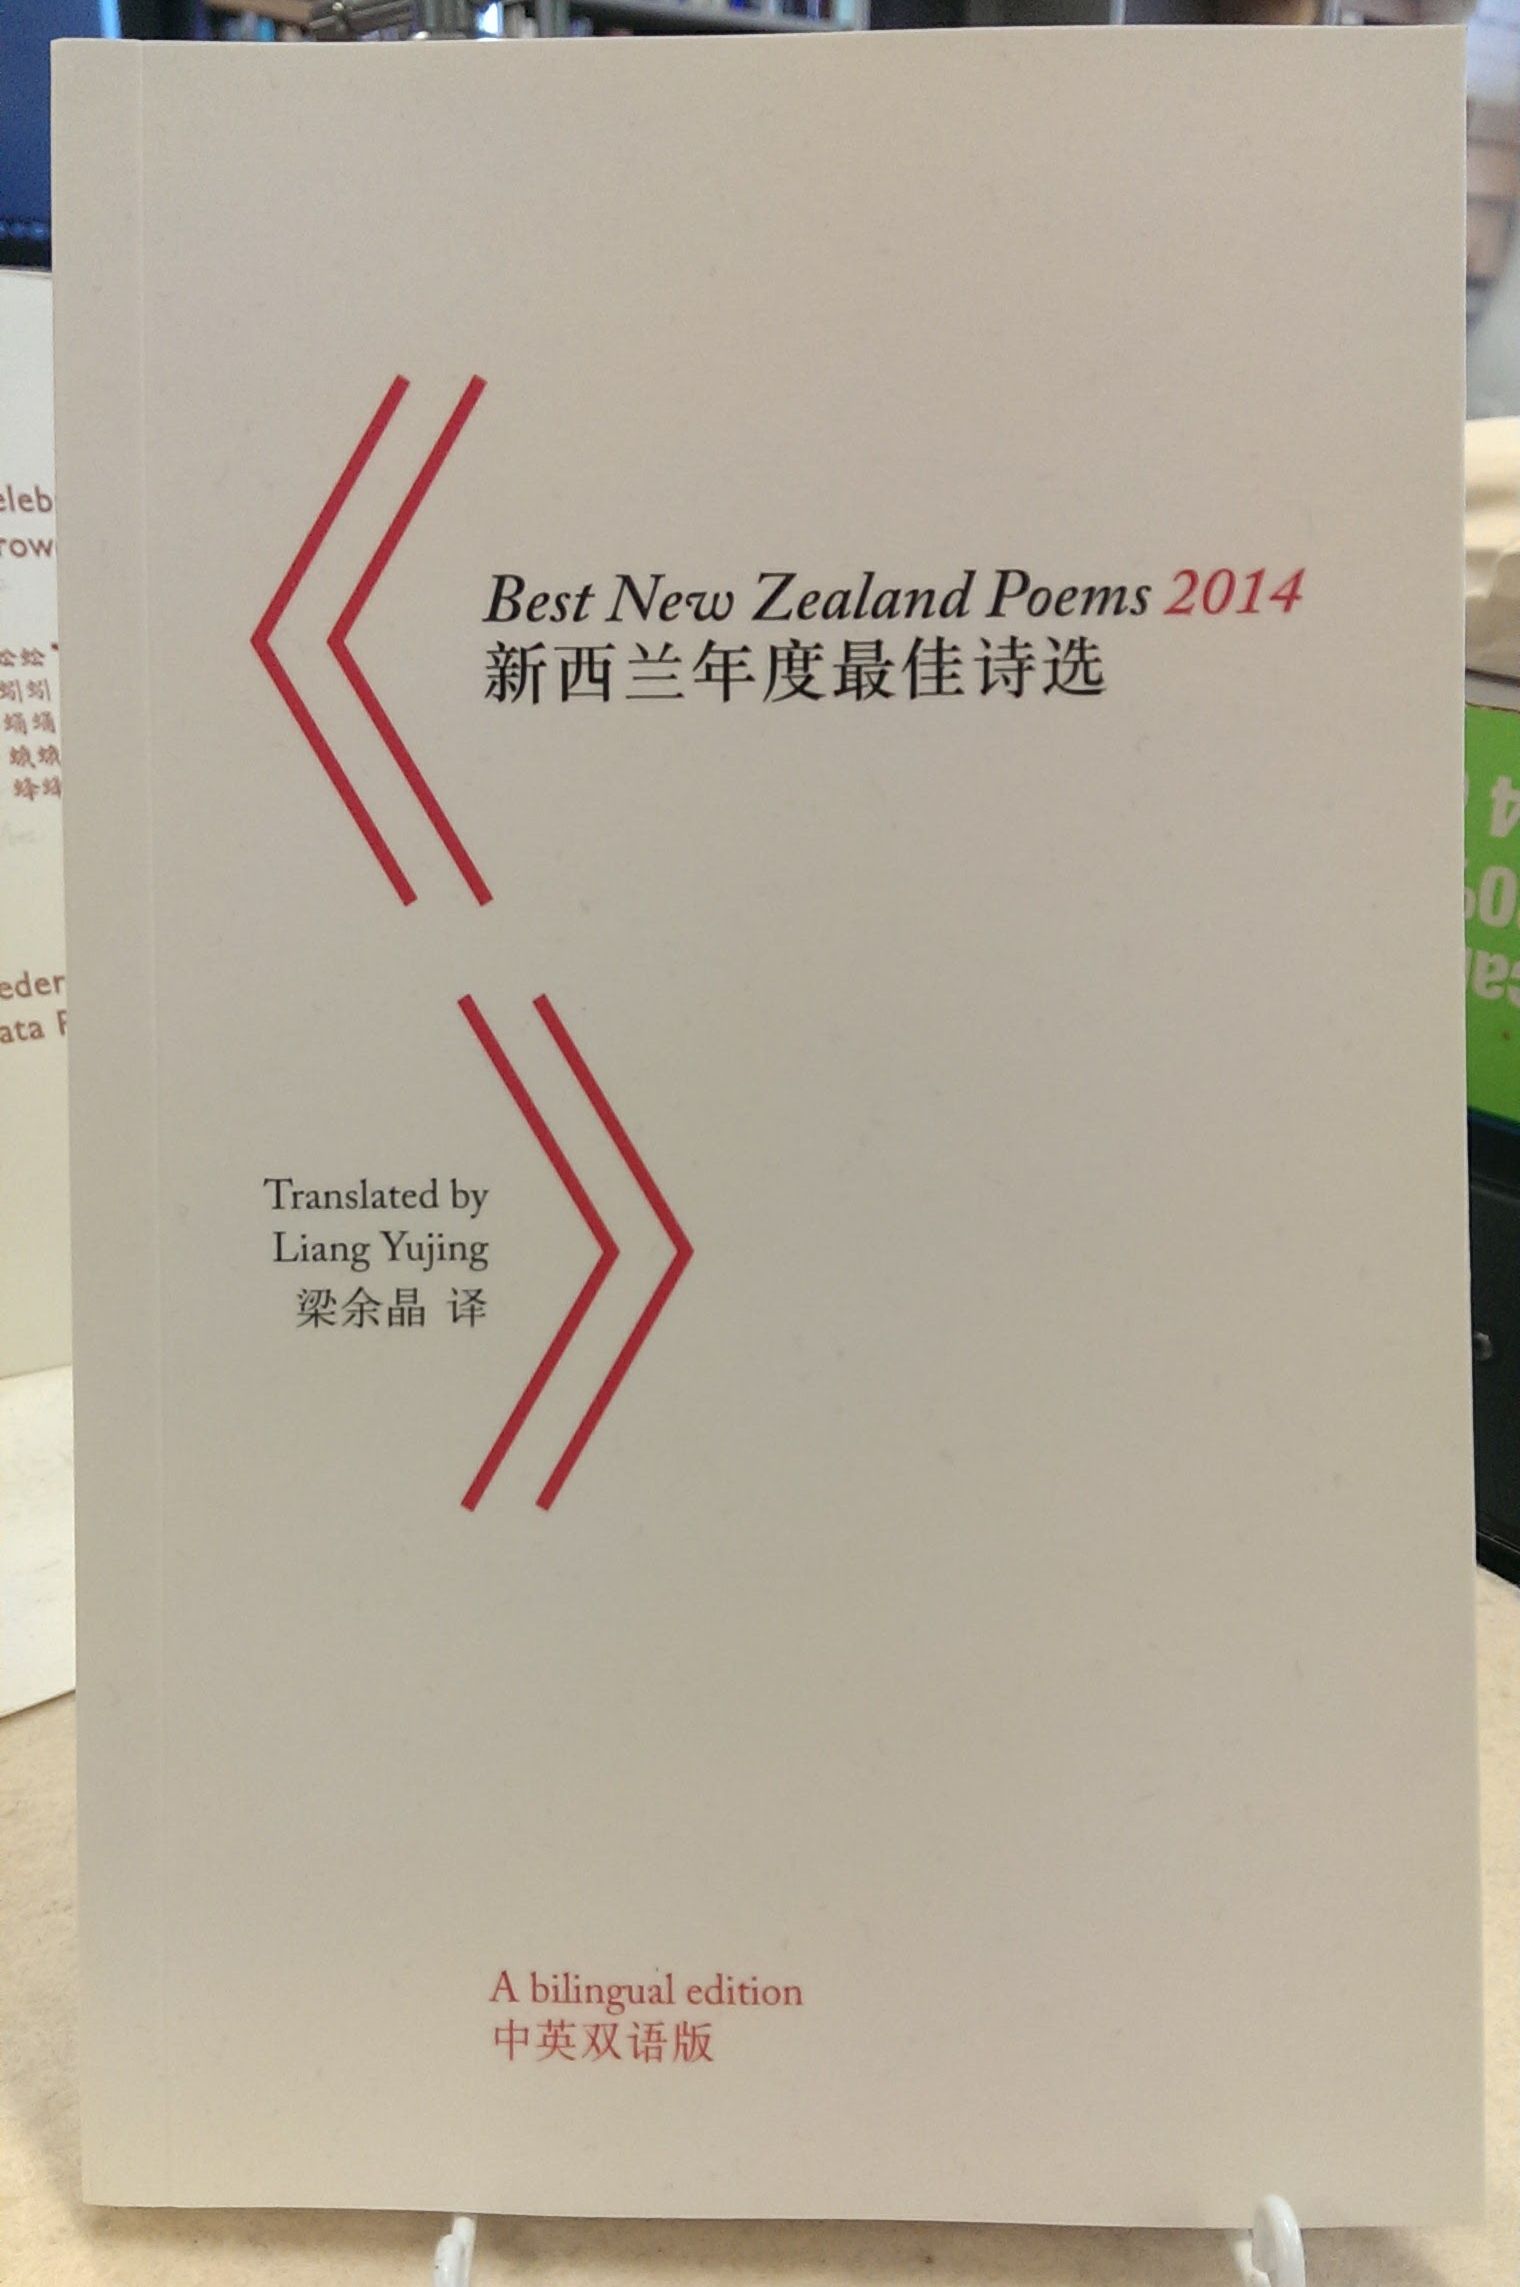 Cover of Mandarin bilingual edition of Best New Zealand Poems 2014